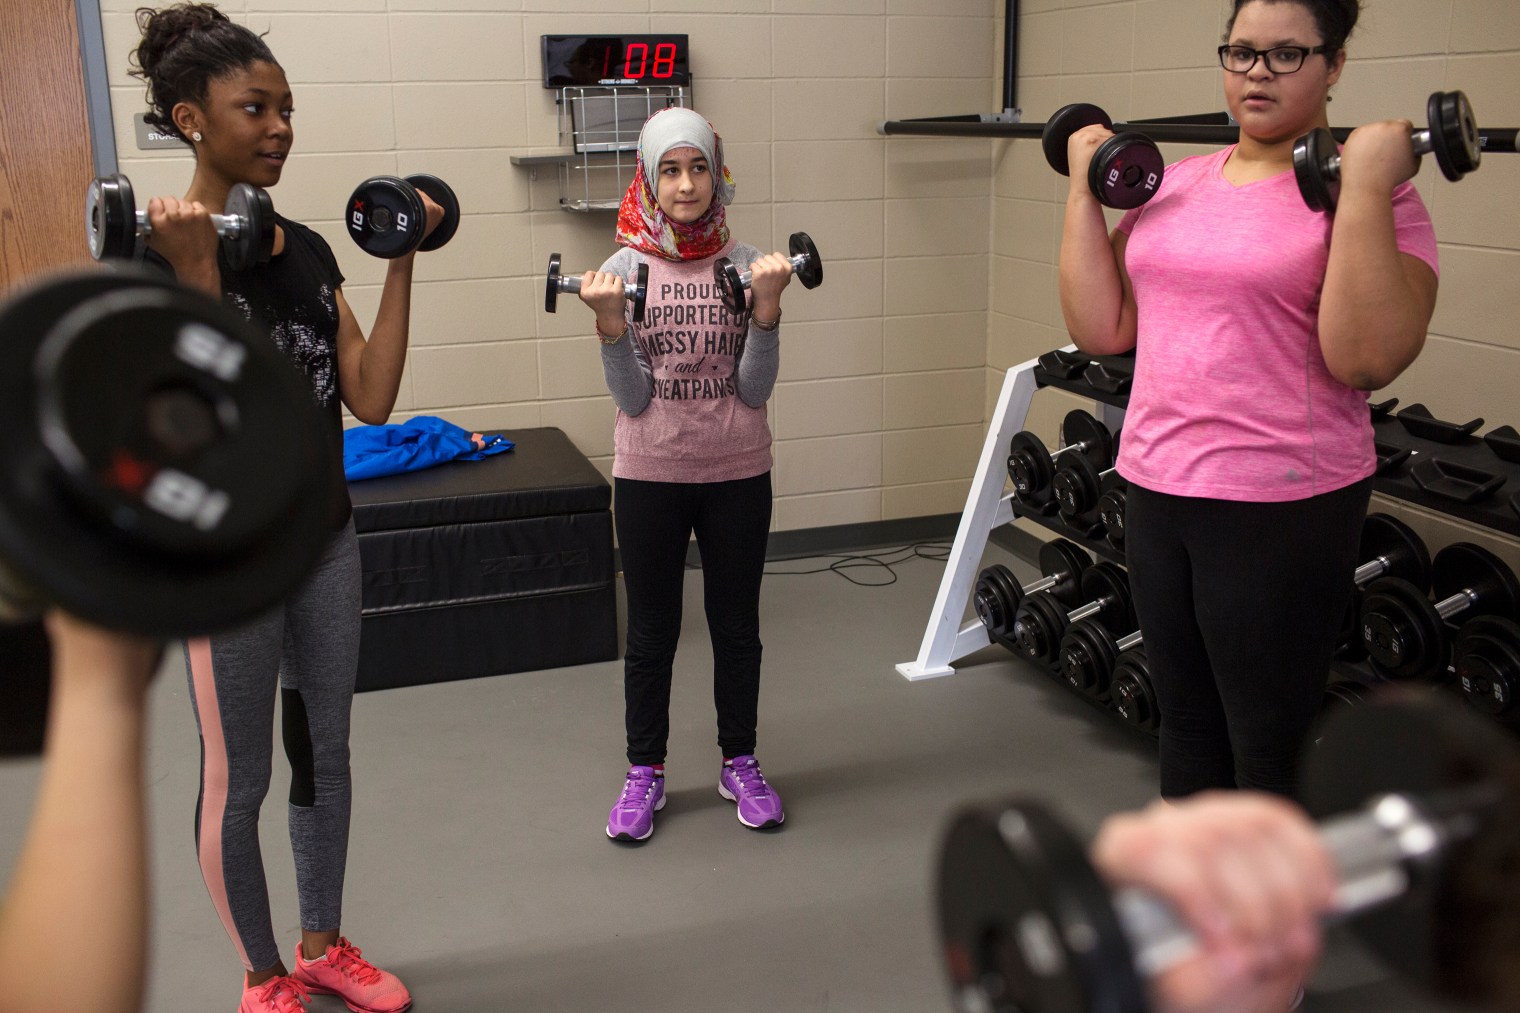 Sedra Tameem lifts weights during gym class at Waukee Middle School. Waukee is a suburb of Des Moines, Iowa.